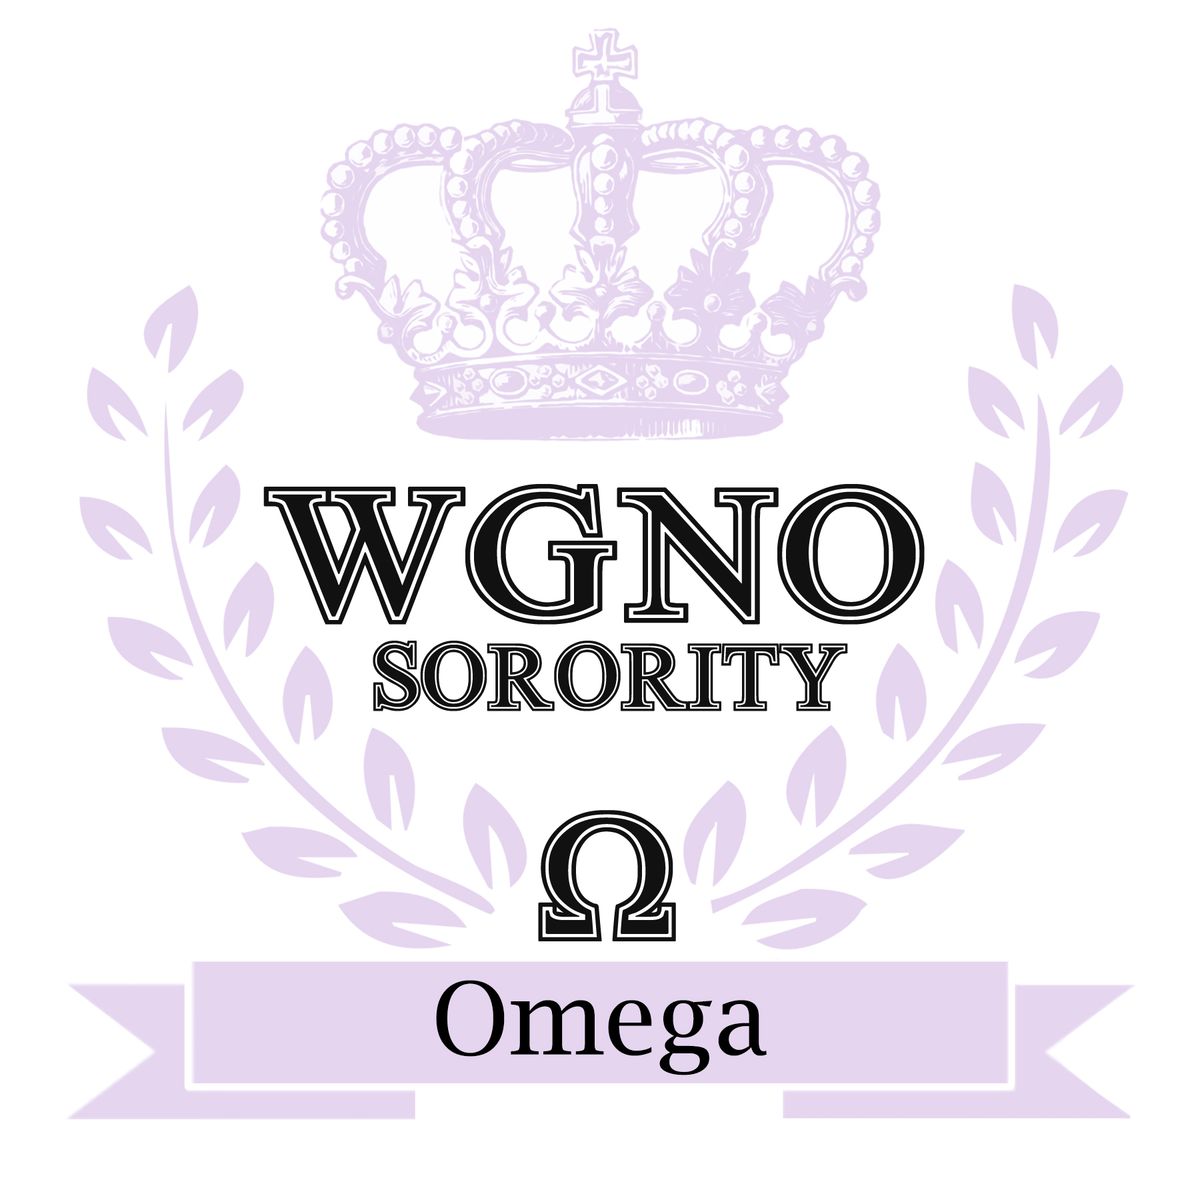 OMEGA CYPRESS 7\/11 Women's Networking Group